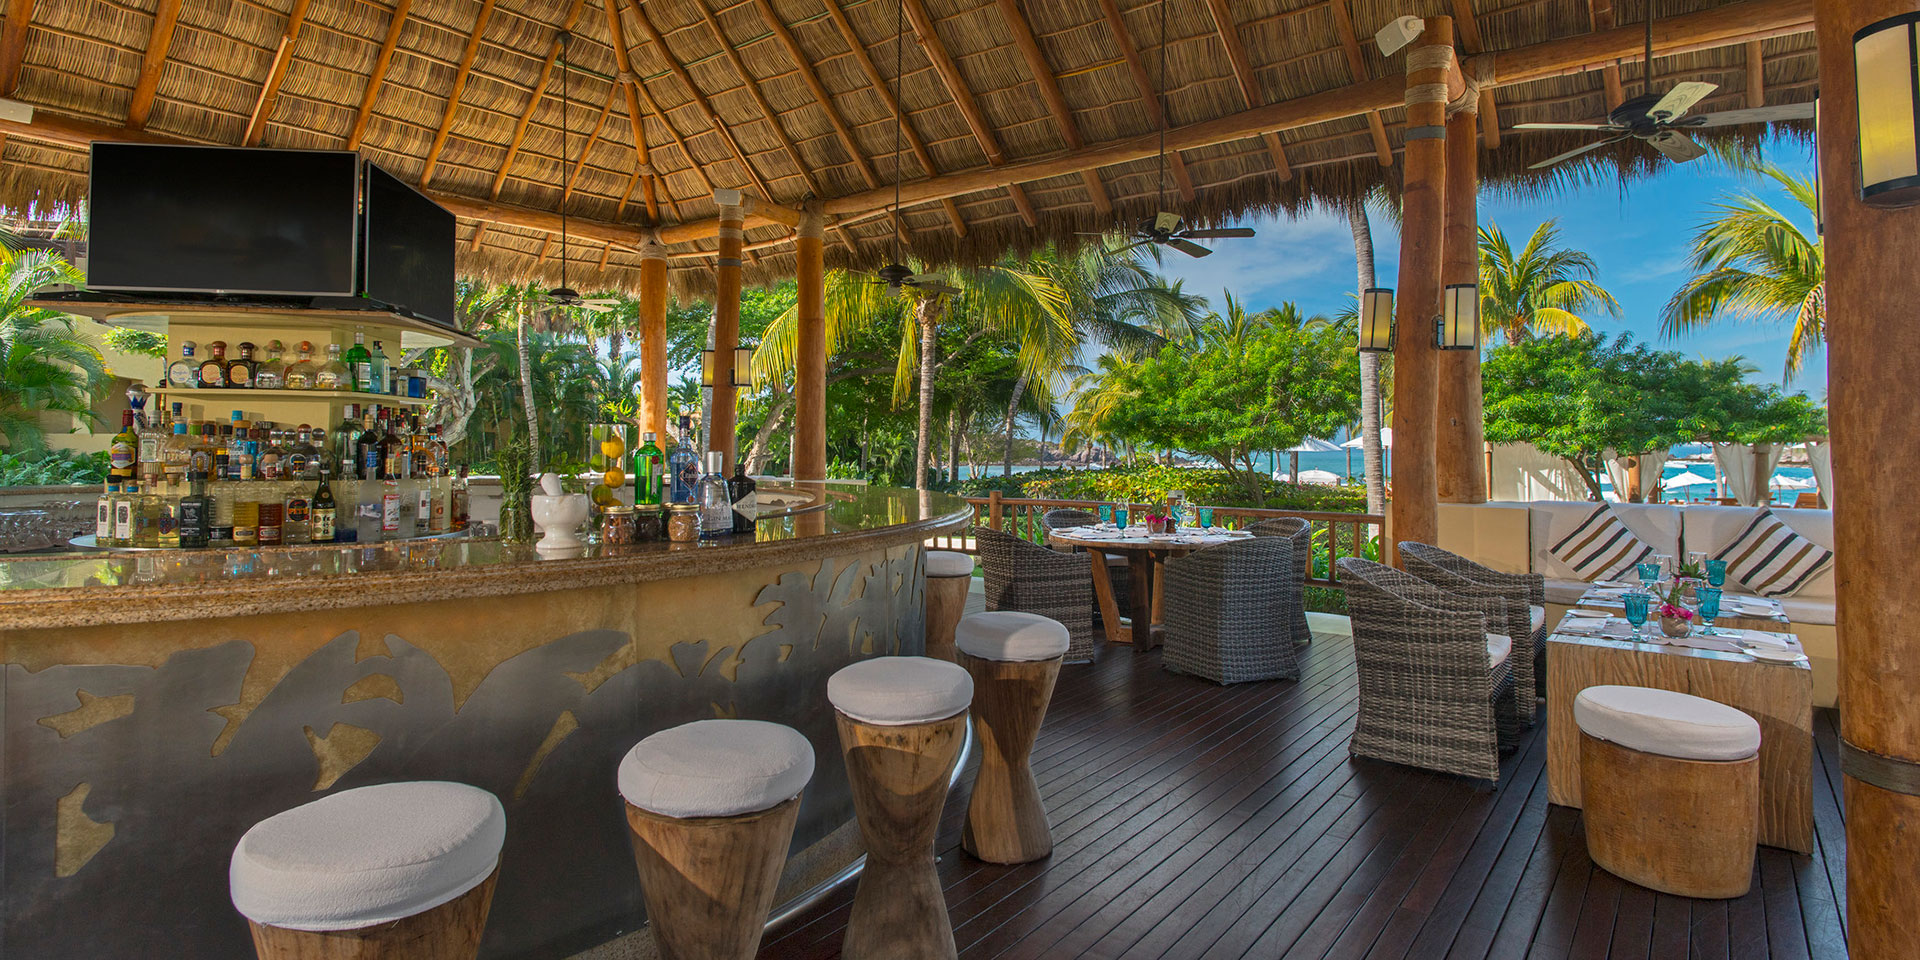 40 House Cocktails? A Guide to Drinking in Punta de Mita